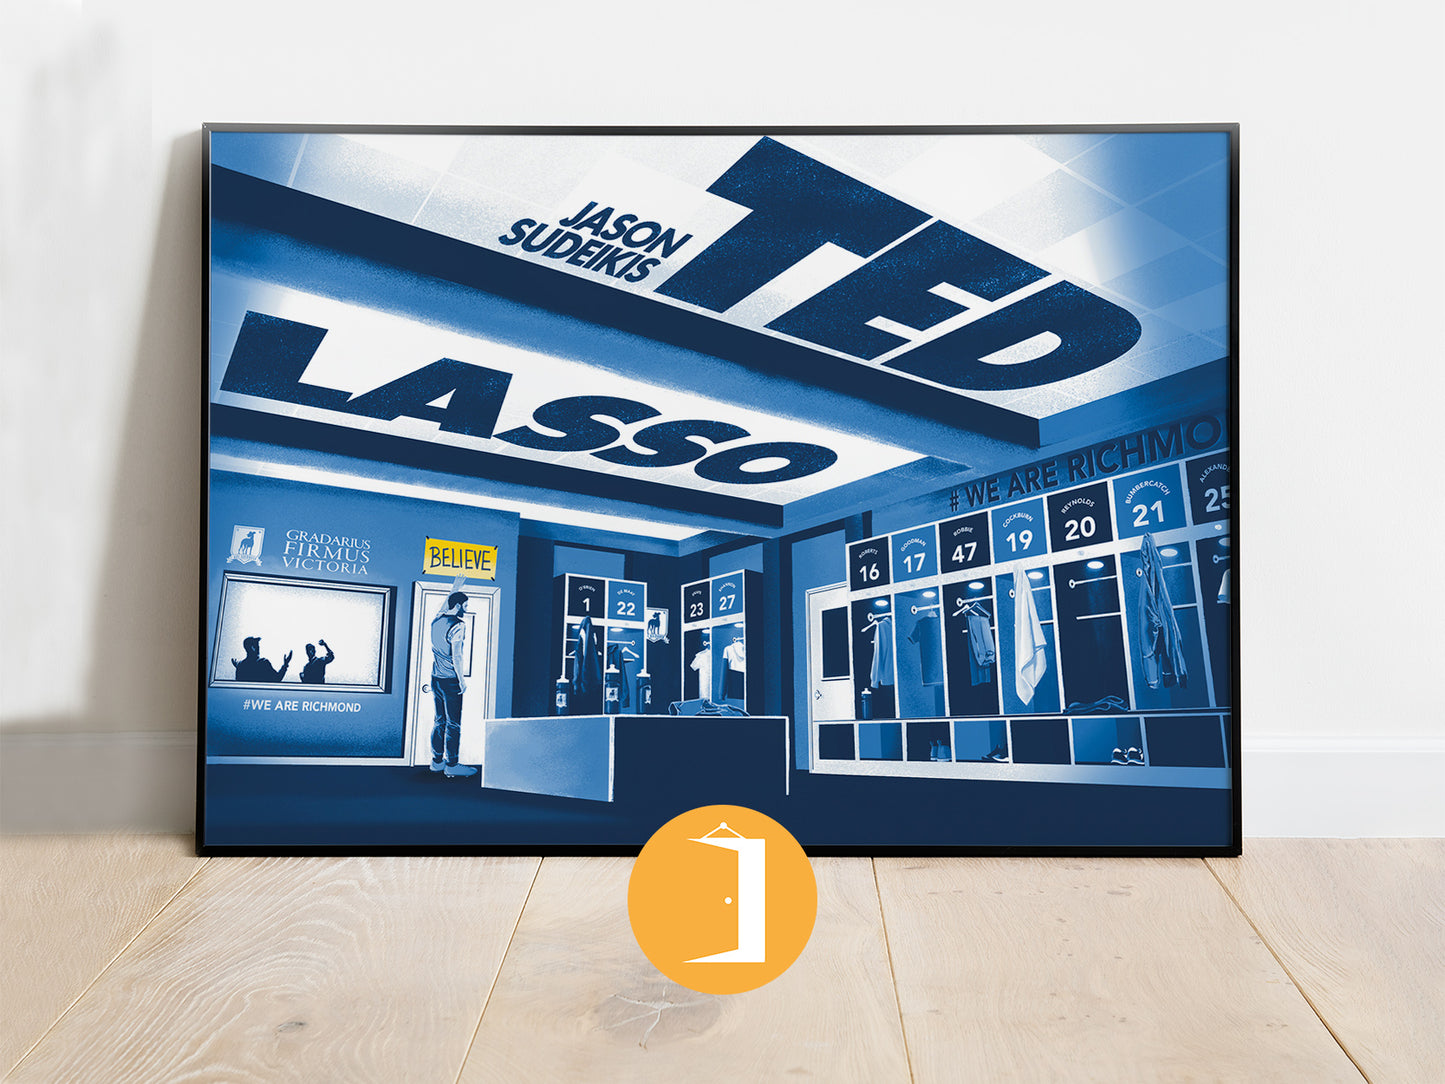 Ted Lasso Poster | Ted Lasso Lockeroom Believe with Roy Kent Illustrated Painting | Gifts and Merchandise